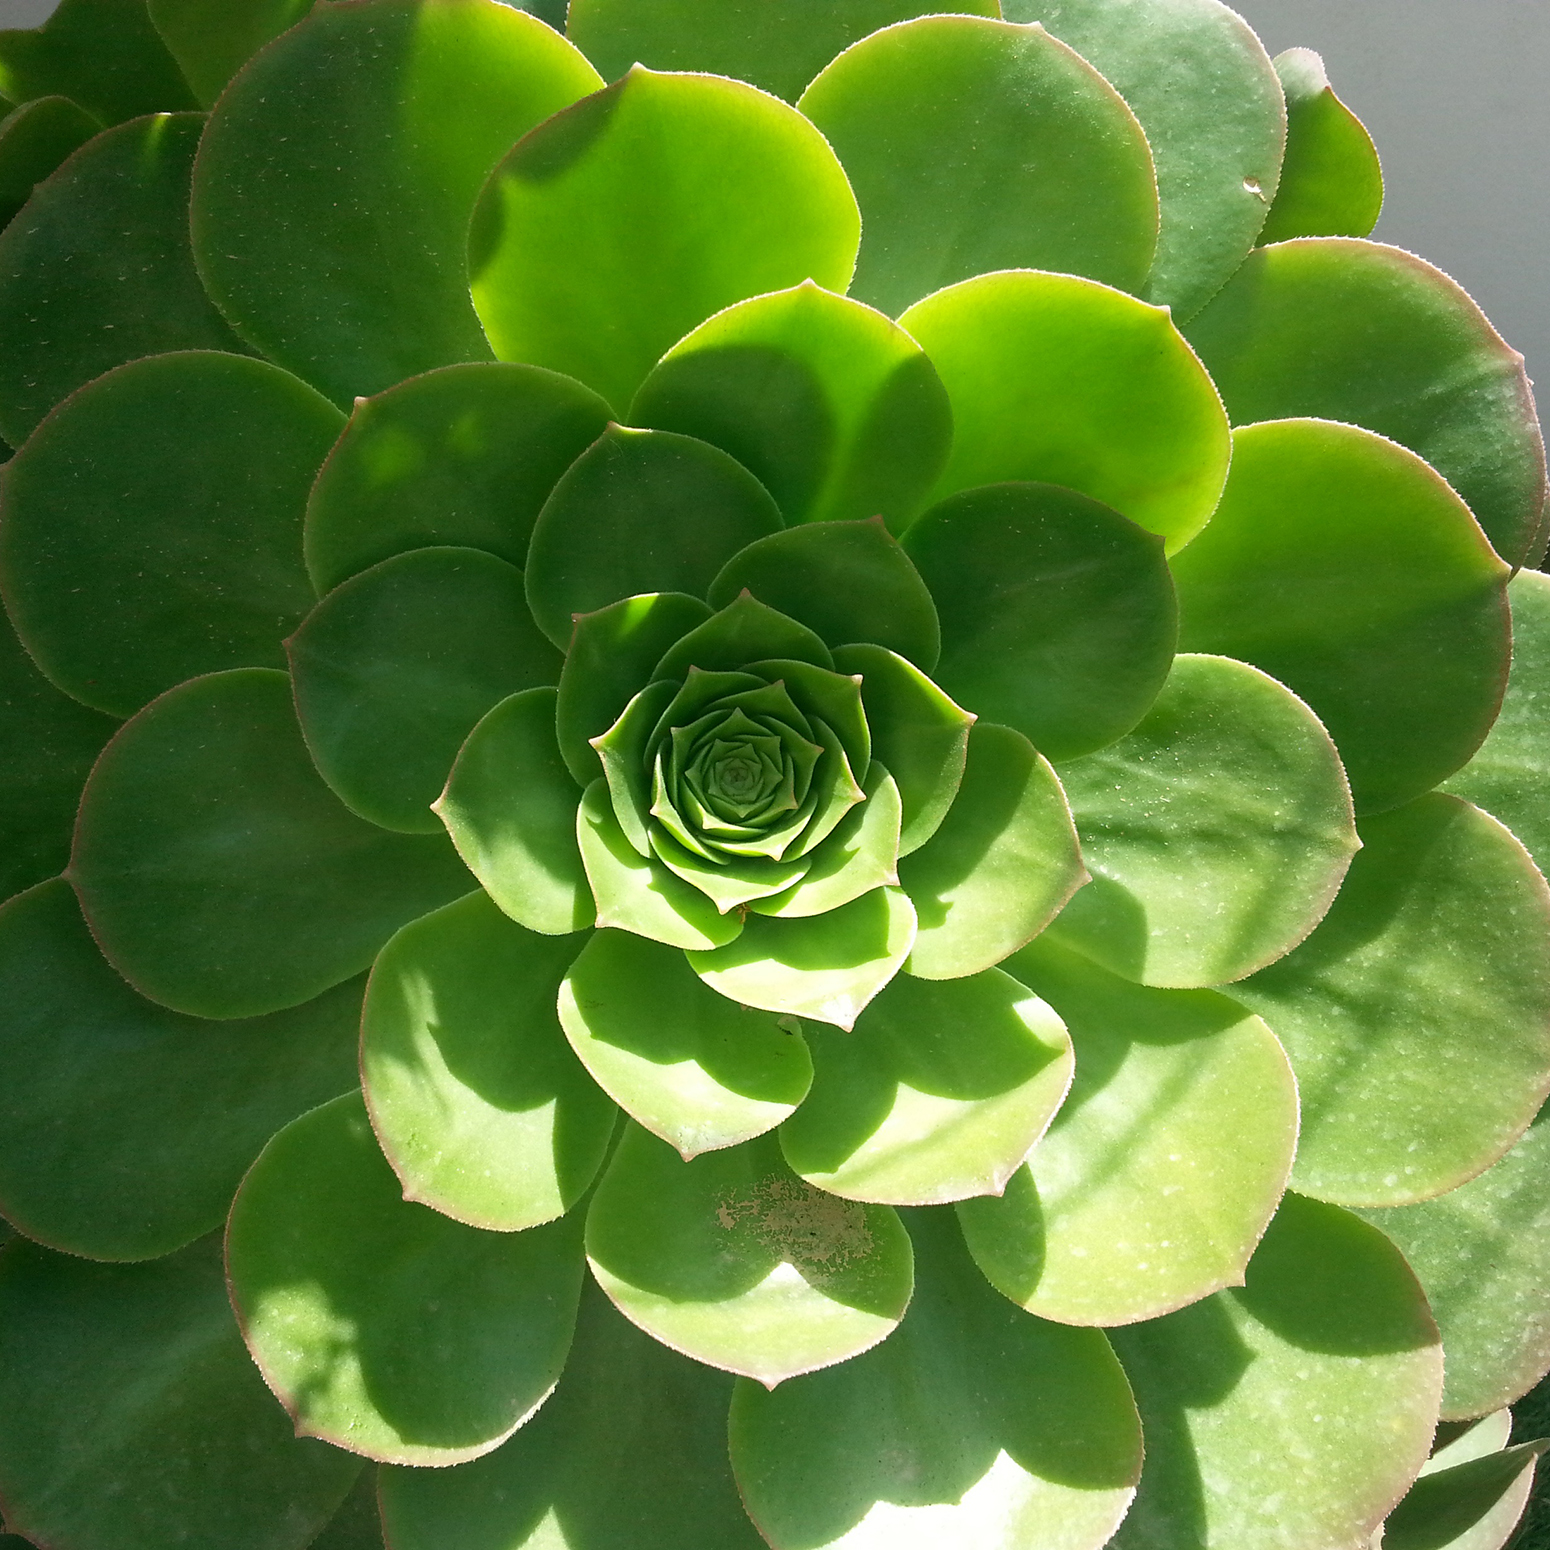 Small green leaves in the center of a succulent plant